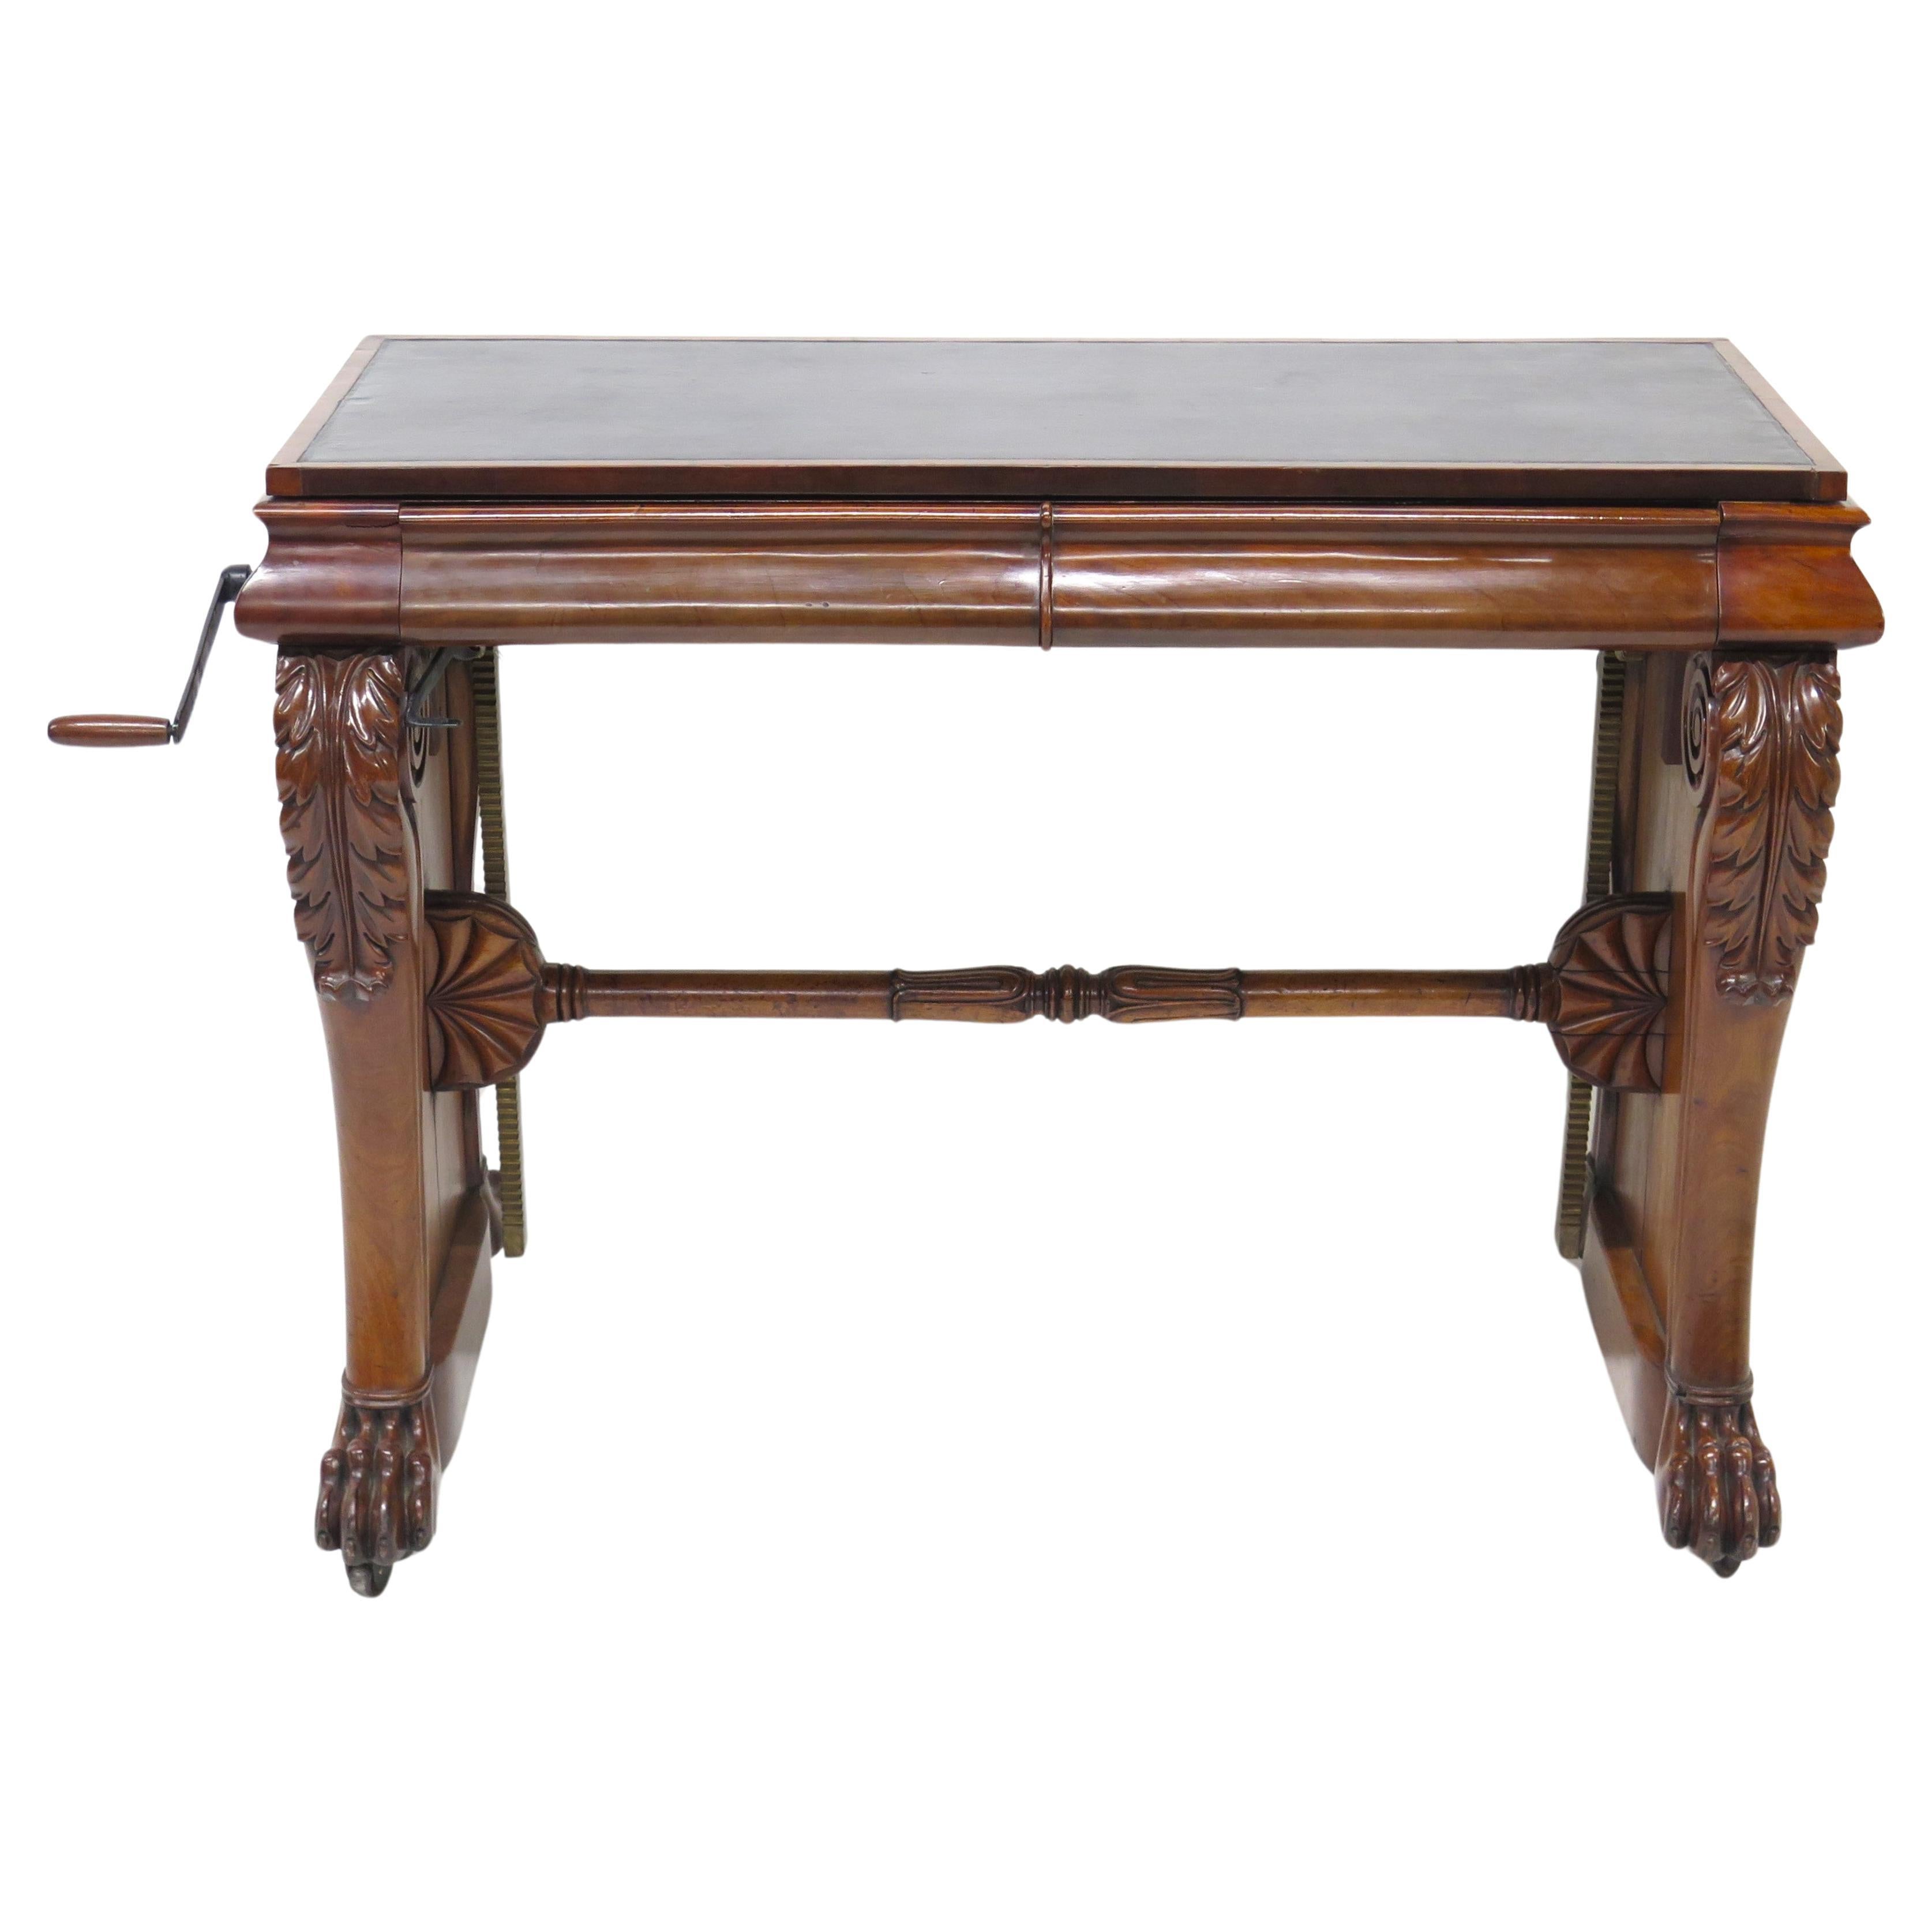 William IV Mahogany Stretcher Based Library Table with Black Leather Top For Sale